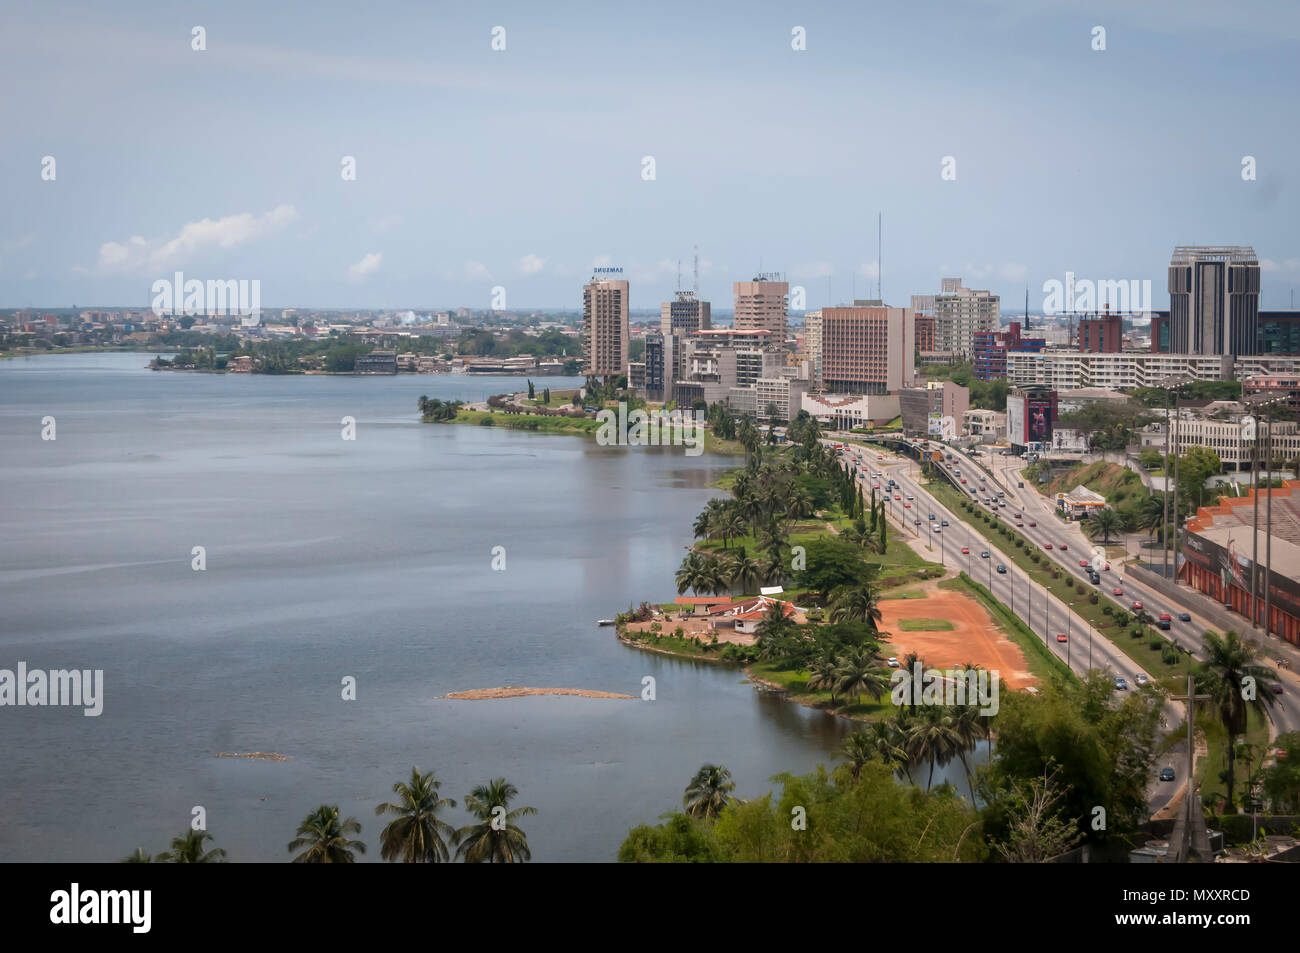 ABIDJAN, IVORY COAST, AFRICA. April 2013. The view of Plateau district in Abidjan, with the 'le Felicia' stadium. Stock Photo